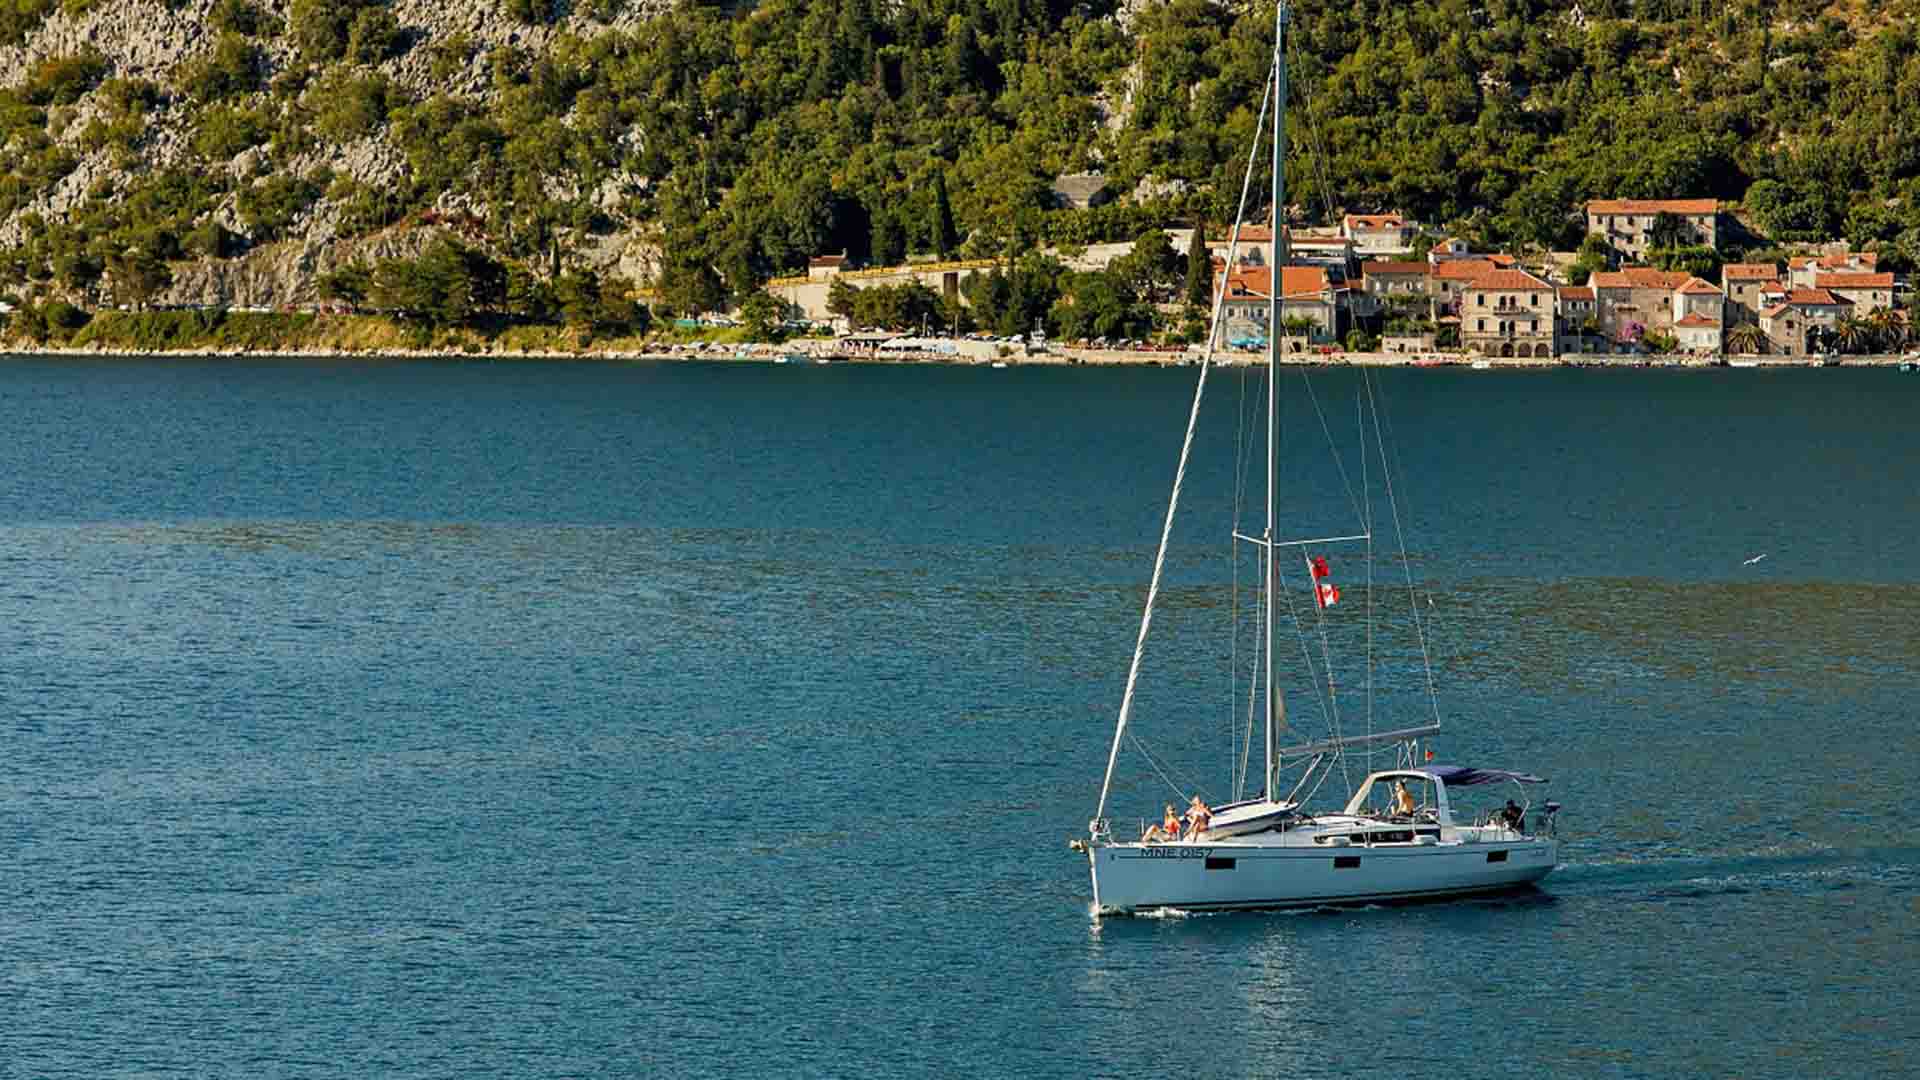 Yacht sailing in Boka bay, Kotor, Montenegro, with small town of Perast behind.